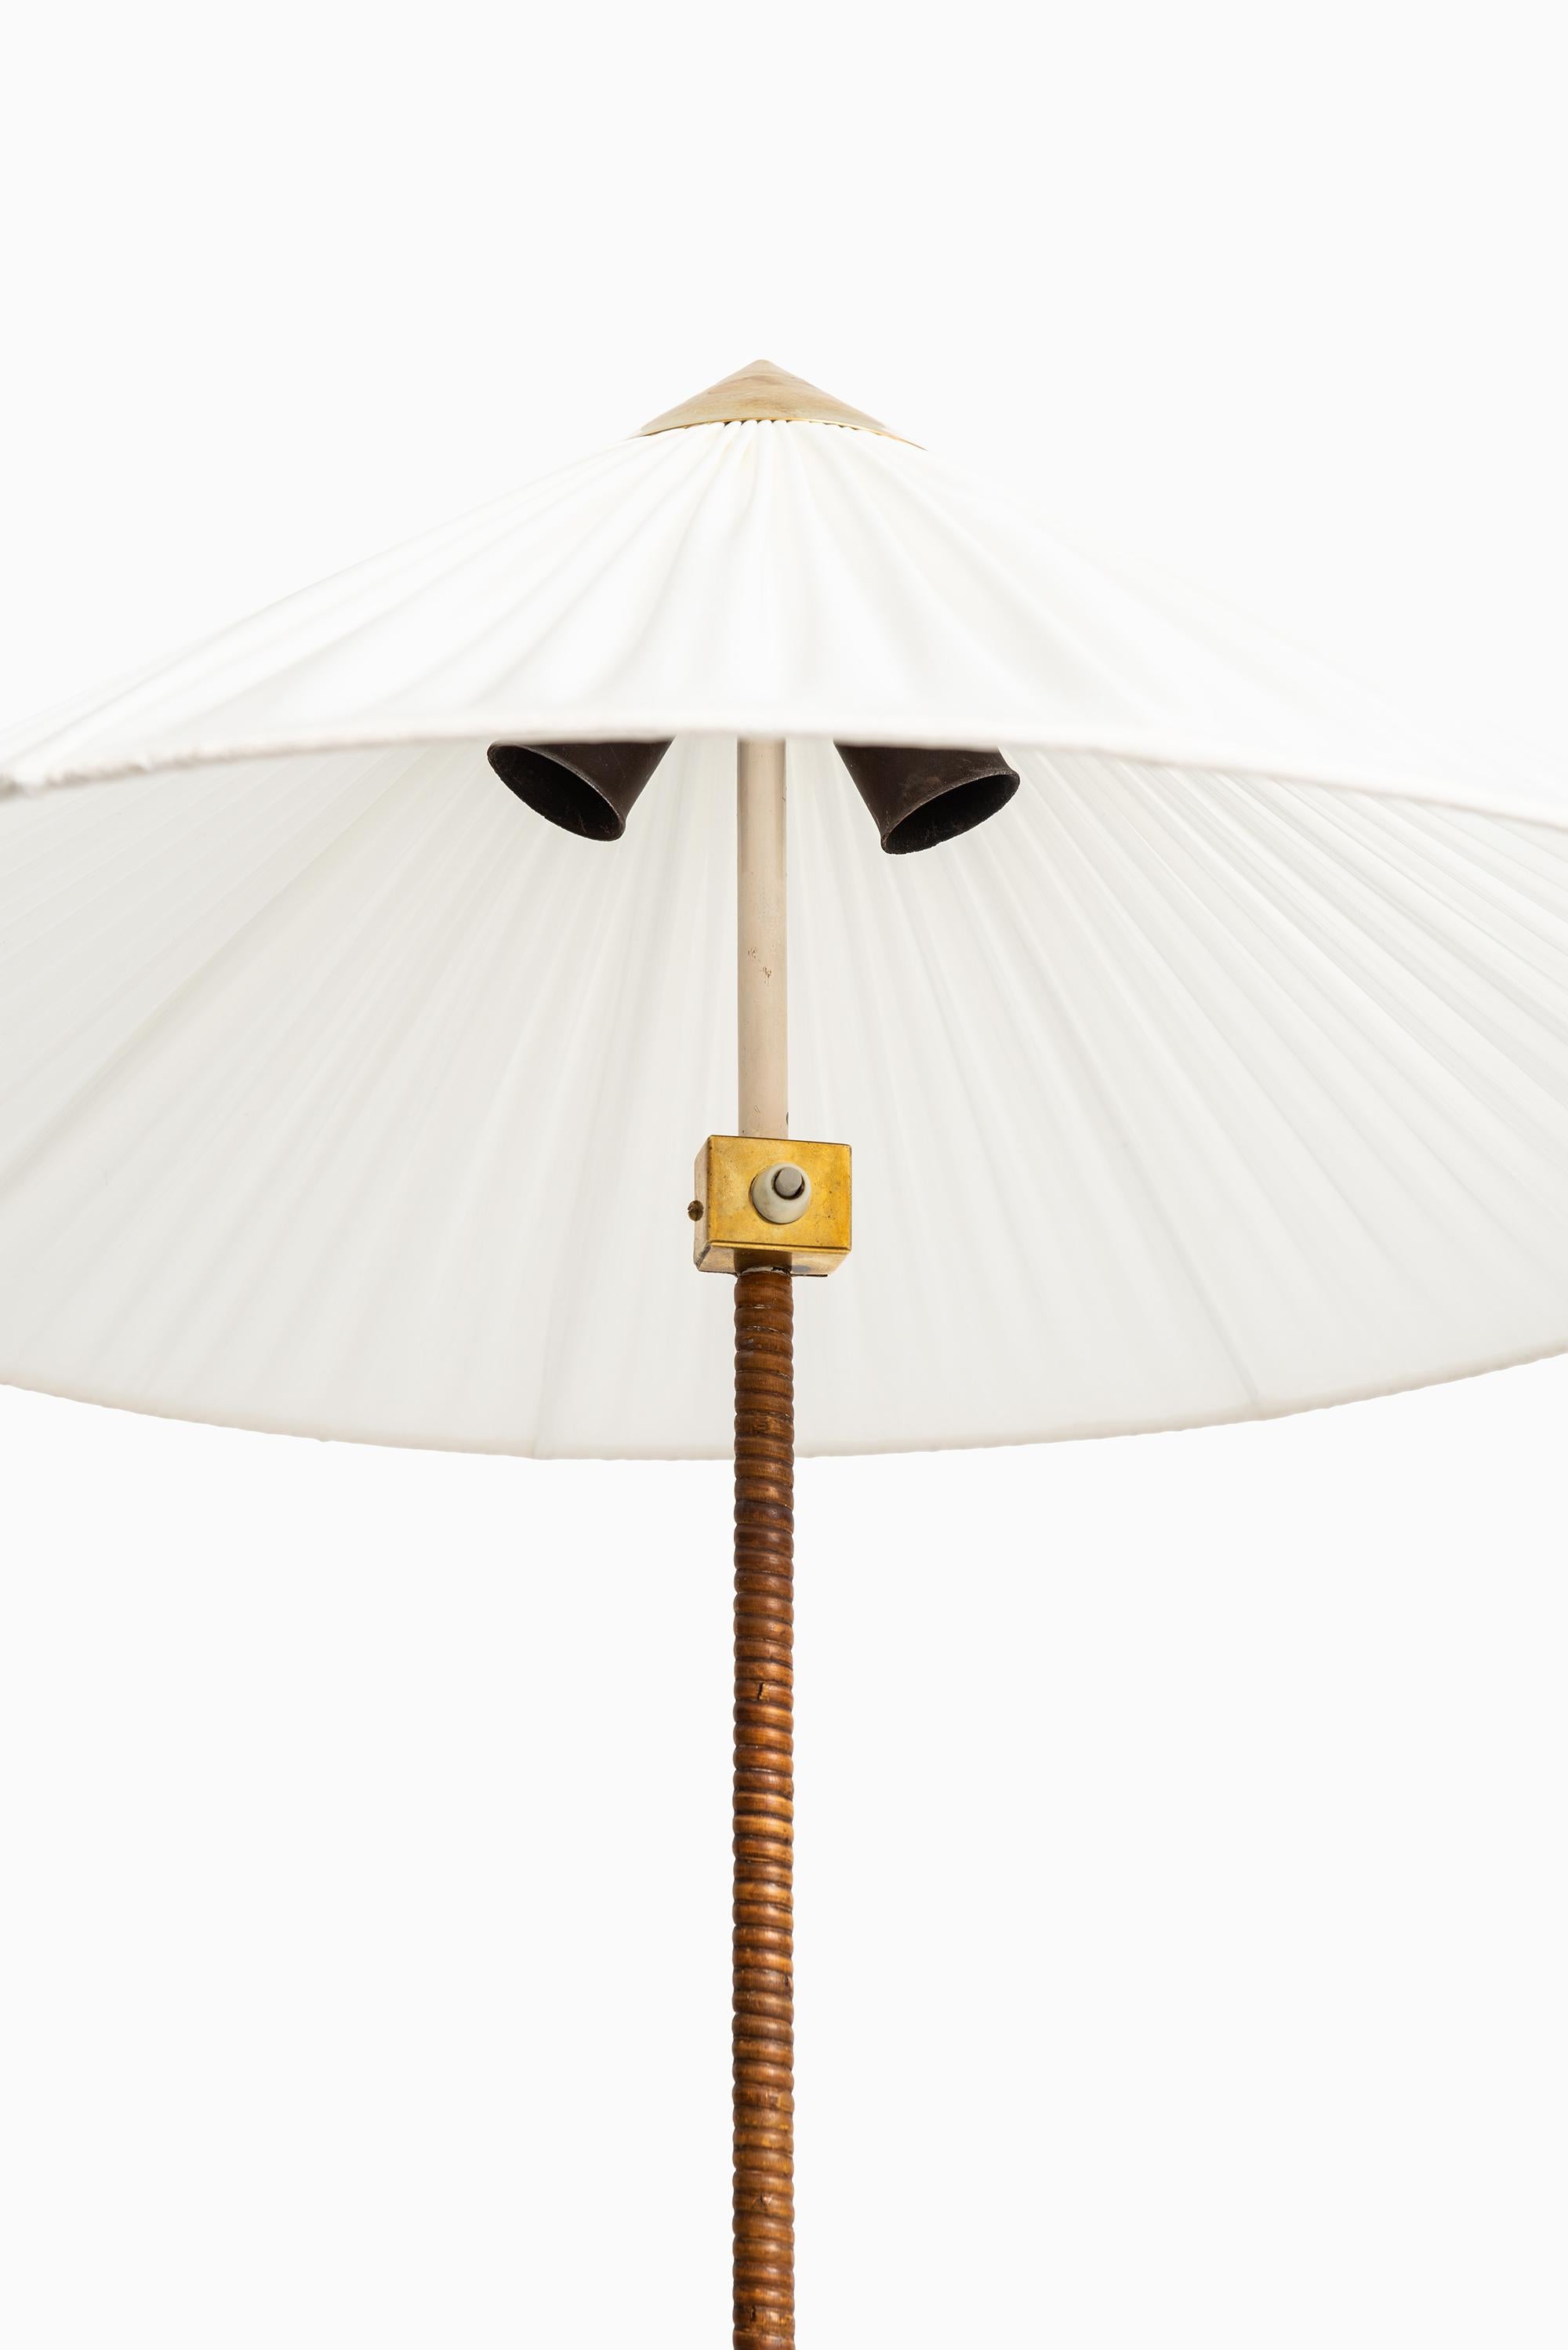 Scandinavian Modern Paavo Tynell Floor Lamps Model 9602 / Chinese Hat by Taito Oy in Finland